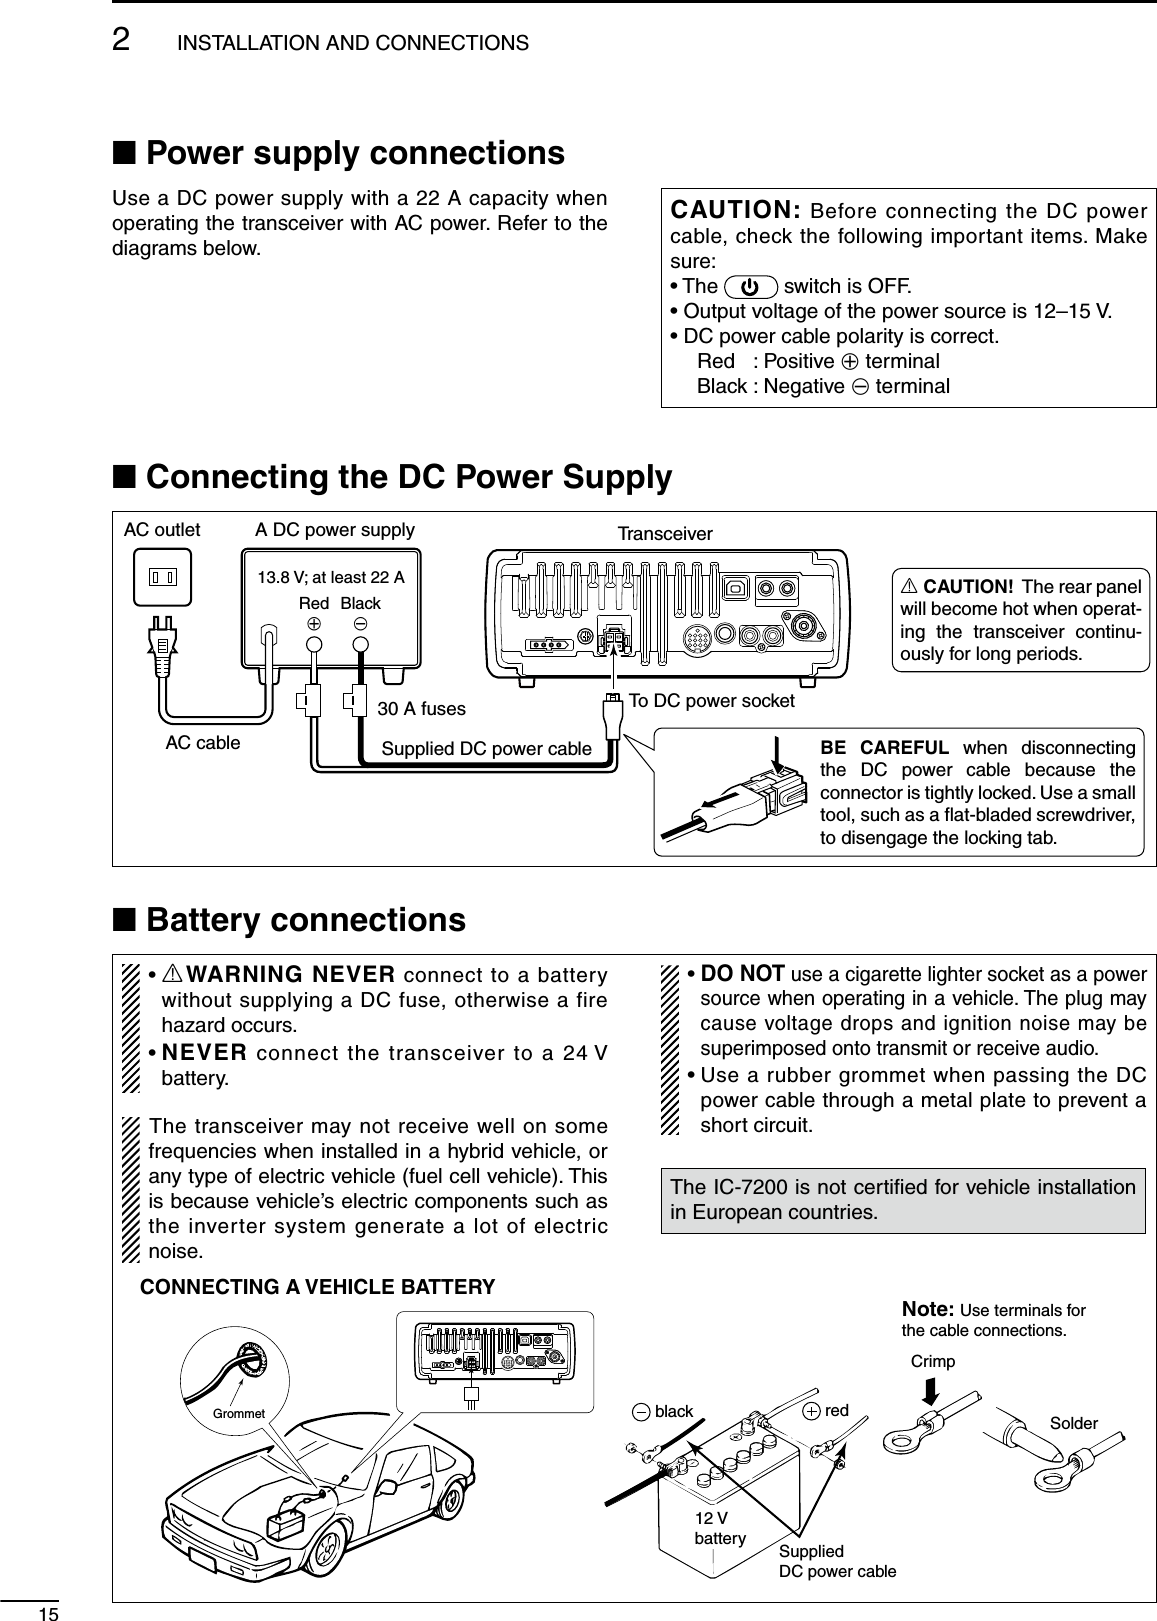 15N Power supply connectionsN Connecting the DC Power SupplyN Battery connections•  RWARNING NEVER connect to a battery without supplying a DC fuse, otherwise a fire hazard occurs.• NEVER connect the transceiver to a 24 V battery.The transceiver may not receive well on some frequencies when installed in a hybrid vehicle, or any type of electric vehicle (fuel cell vehicle). This is because vehicle’s electric components such as the inverter system generate a lot of electric noise.•  DO NOT use a cigarette lighter socket as a power source when operating in a vehicle. The plug may cause voltage drops and ignition noise may be superimposed onto transmit or receive audio.• Use a rubber grommet when passing the DC power cable through a metal plate to prevent a short circuit.The IC-7200 is not certiﬁed for vehicle installation in European countries.GrommetCONNECTING A VEHICLE BATTERYNote: Use terminals forthe cable connections.CrimpSolderSuppliedDC power cableredblack12 Vbattery2INSTALLATION AND CONNECTIONSUse a DC power supply with a 22 A capacity when operating the transceiver with AC power. Refer to the diagrams below.CAUTION: Before connecting the DC power cable, check the following important items. Make sure:• The   switch is OFF.• Output voltage of the power source is 12–15 V.• DC power cable polarity is correct. Red : Positive + terminal Black : Negative _ terminalA DC power supplyAC outletAC cable30 A fusesSupplied DC power cable13.8 V; at least 22 ABlack_Red+TransceiverTo DC power socketBE CAREFUL when disconnecting the DC power cable because the connector is tightly locked. Use a small tool, such as a flat-bladed screwdriver, to disengage the locking tab.R CAUTION! The rear panel will become hot when operat-ing the transceiver continu-ously for long periods.